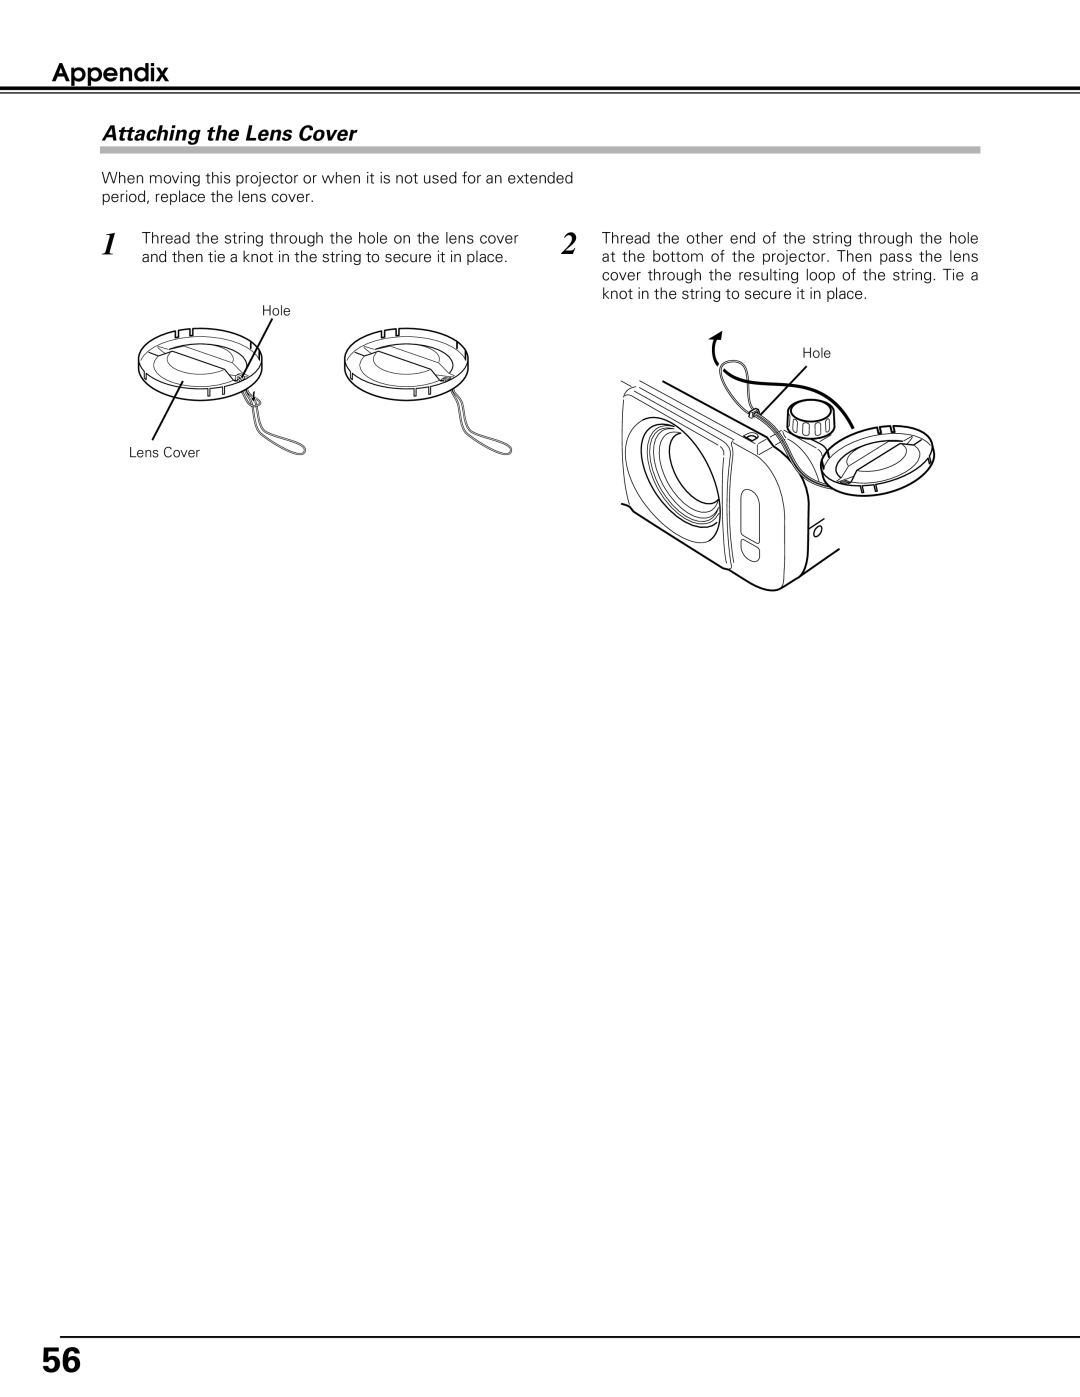 Eiki LC-XE10 instruction manual Attaching the Lens Cover, Appendix 